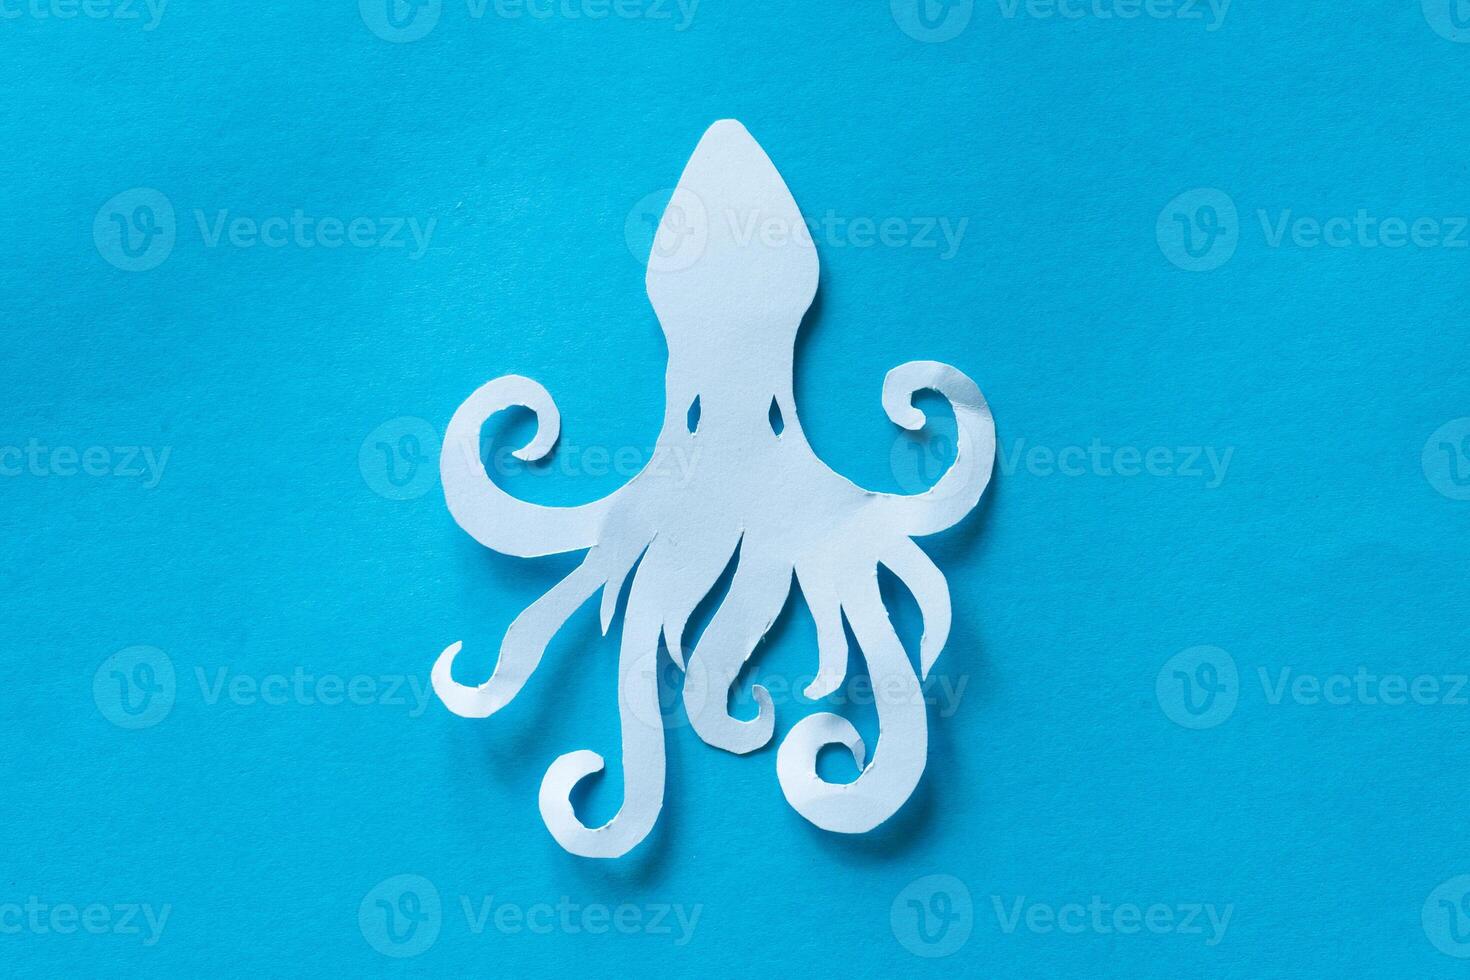 octopus paper cut out on blue background photo